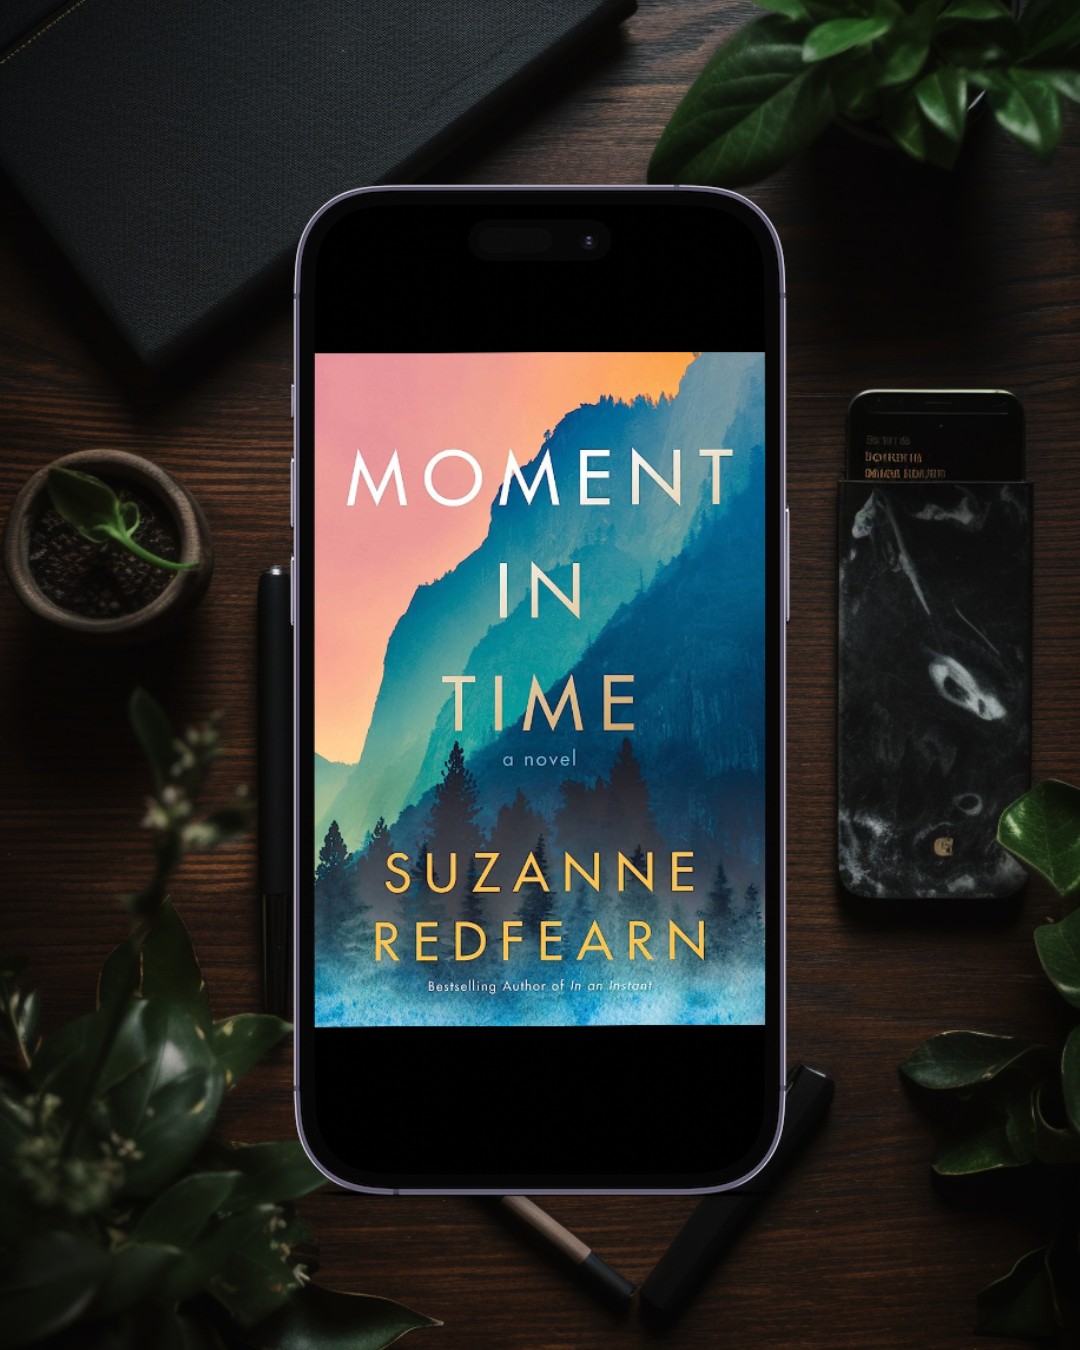 Get a glimpse into the story of Moment In Time by Suzanne Redfearn with this detailed summary and review, including a legal analysis of this book.